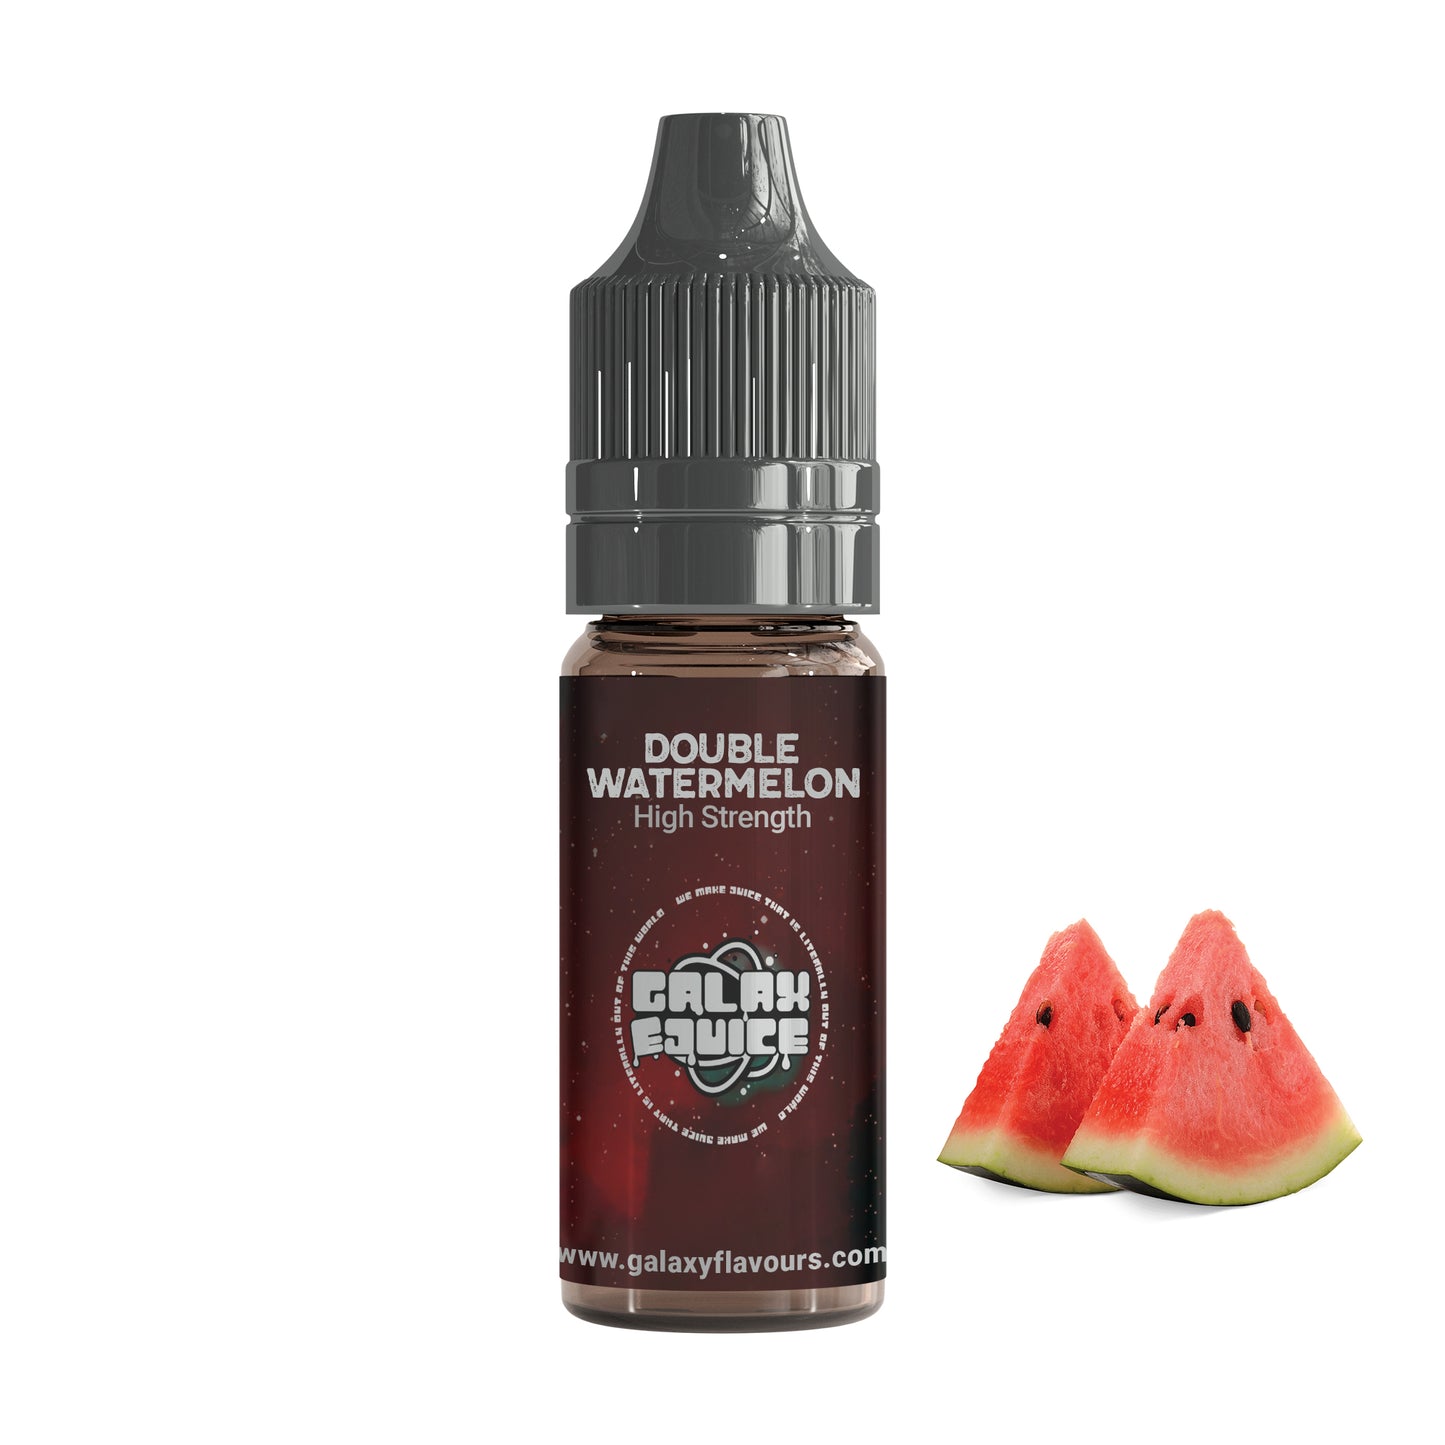 Double Watermelon High Strength Professional Flavouring.